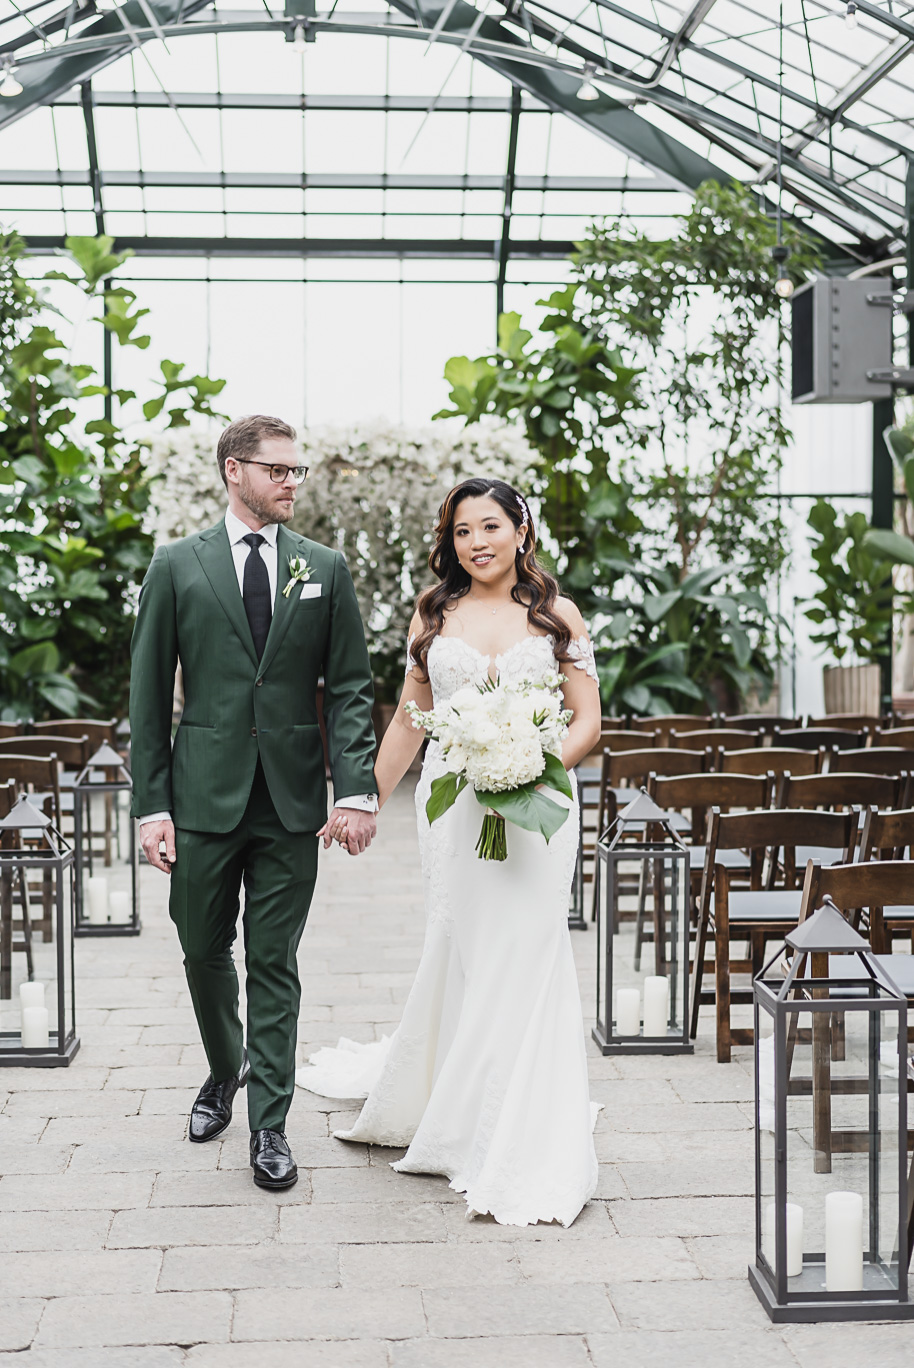 A magical winter Planterra garden wedding with a green color palette in West Bloomfield, Michigan provided by Kari Dawson Photograhy.